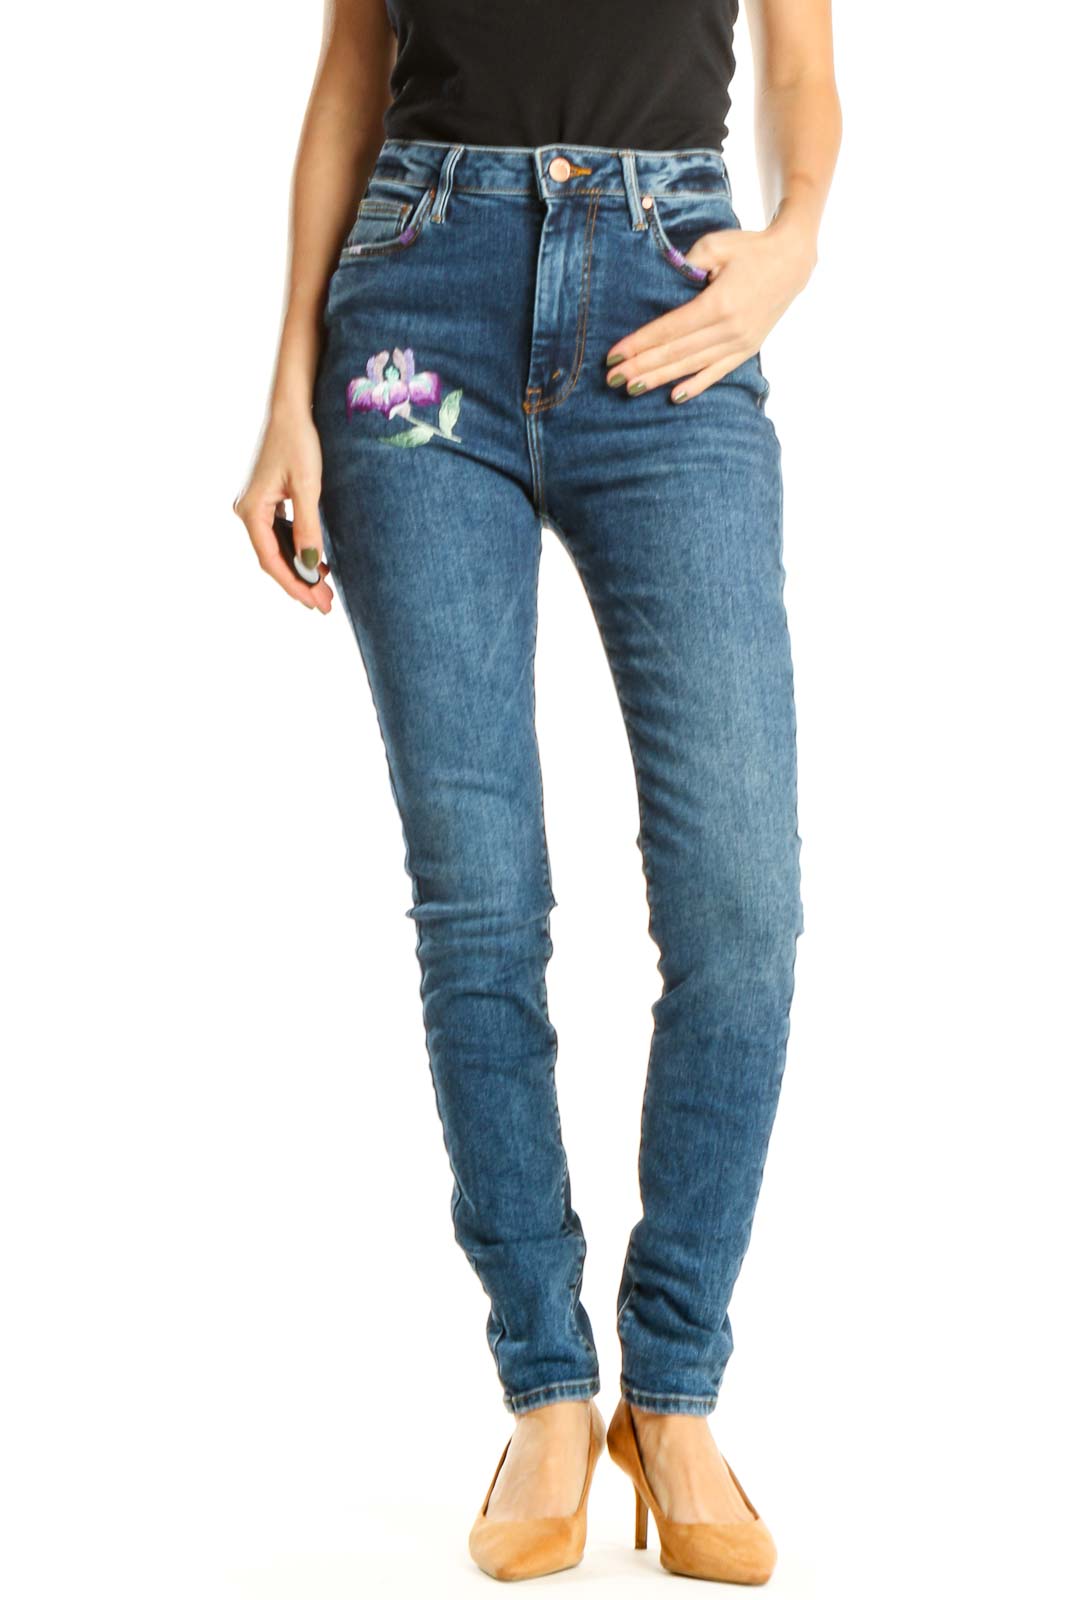 Reworked: Hand Embroidered Denim with Purple Flower Front